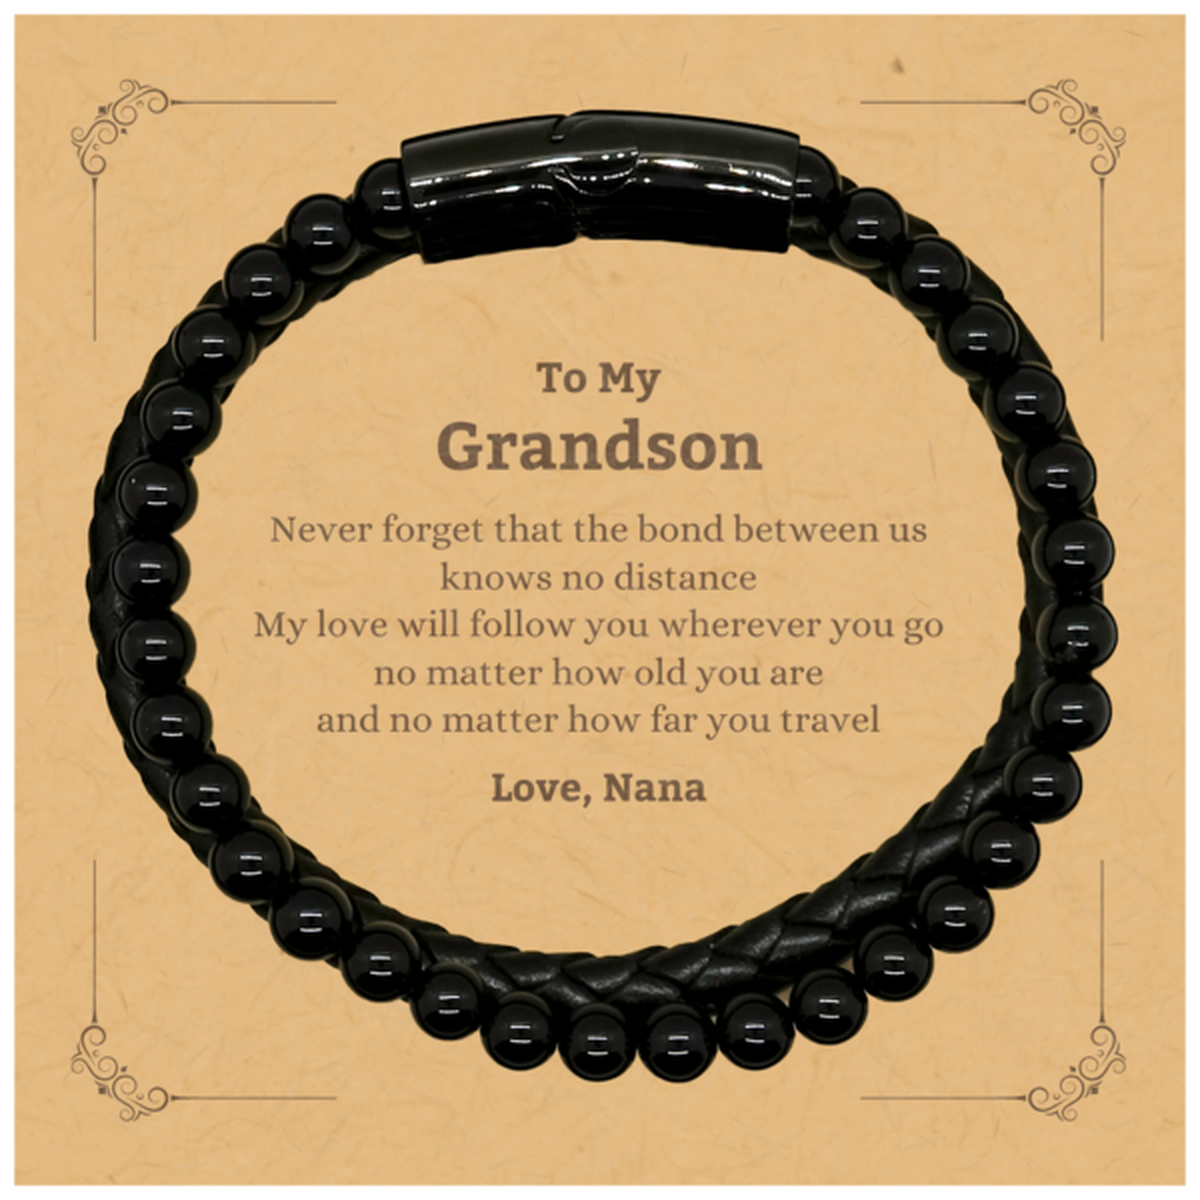 Grandson Birthday Gifts from Nana, Adjustable Stone Leather Bracelets for Grandson Christmas Graduation Unique Gifts Grandson Never forget that the bond between us knows no distance. Love, Nana